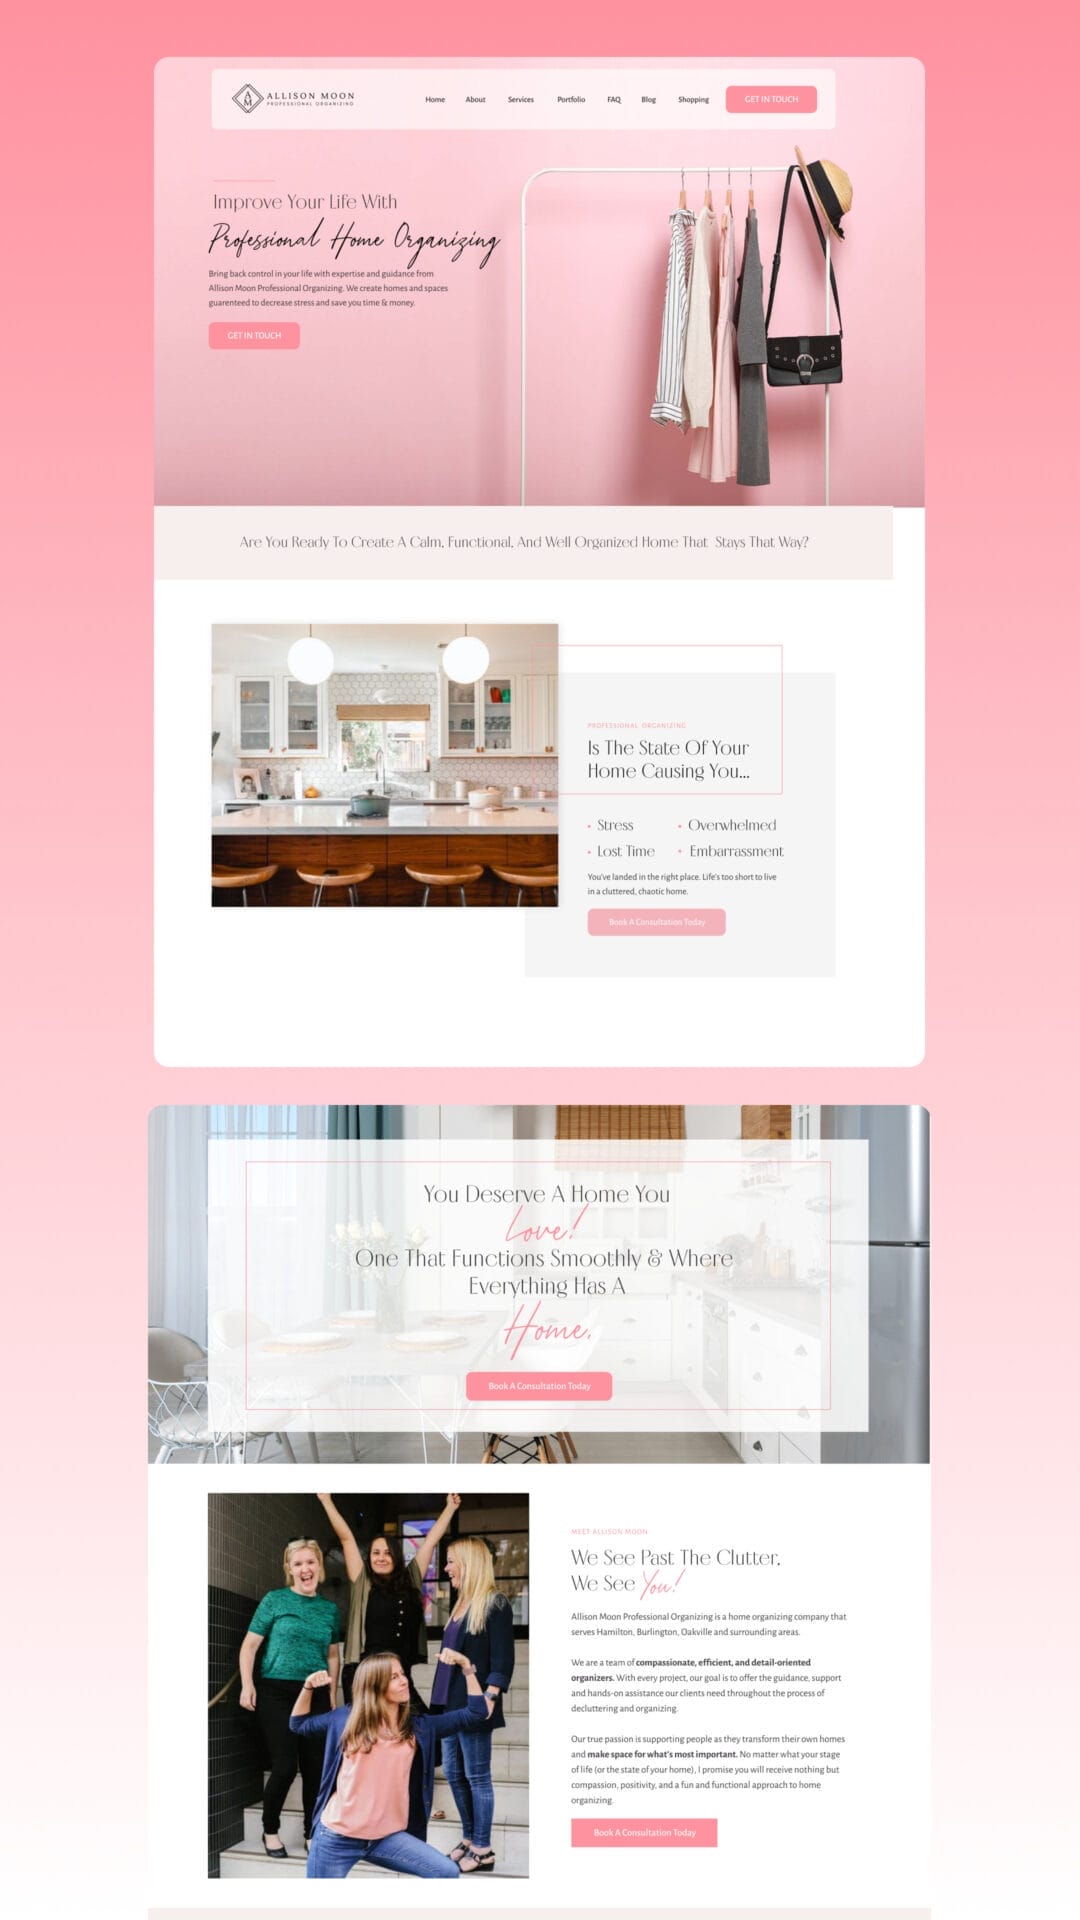 A pink and white website design for a real estate company.